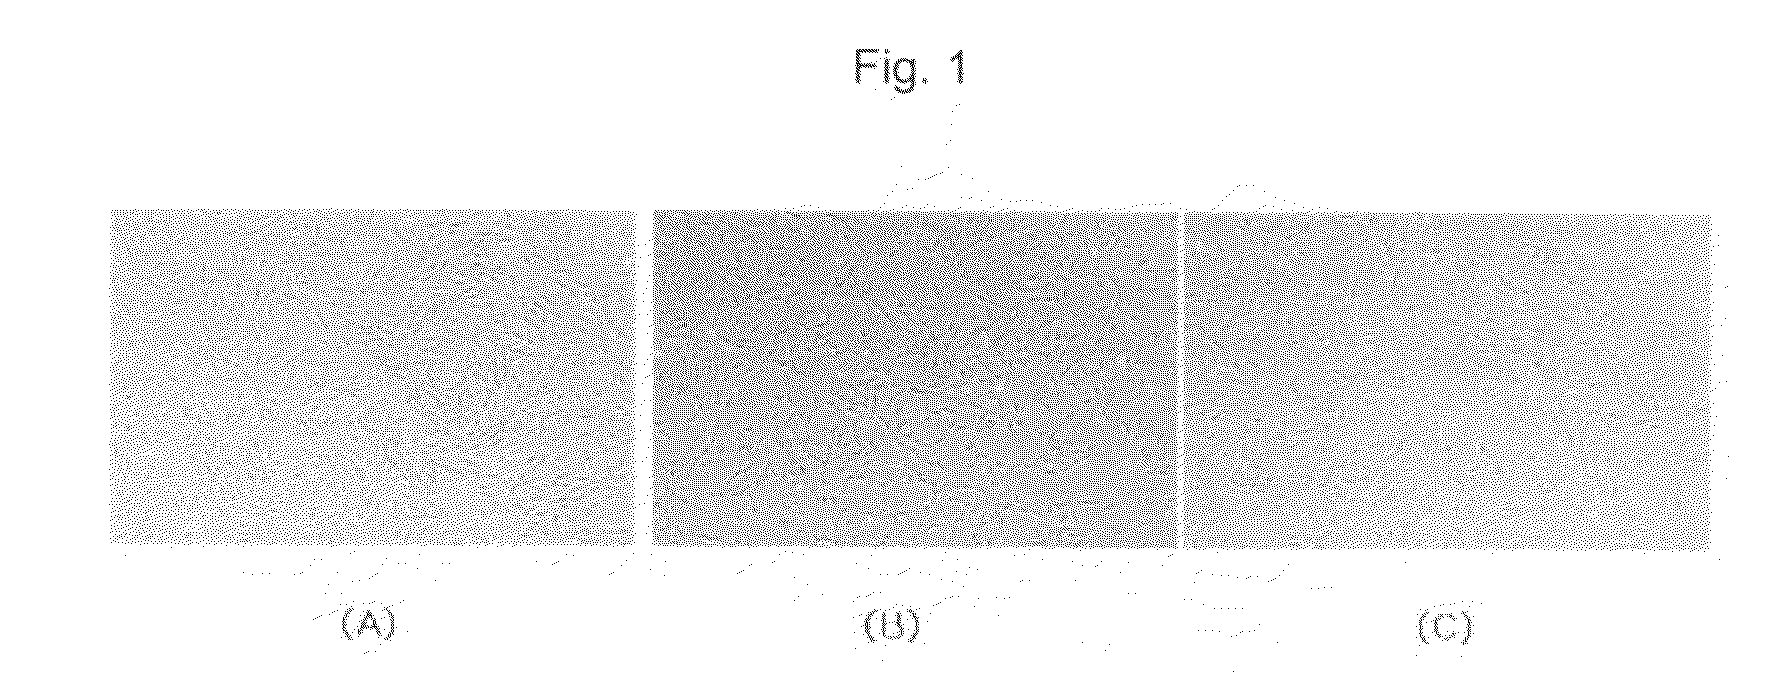 Neuronal differentiation method of adult stem cells using small molecules